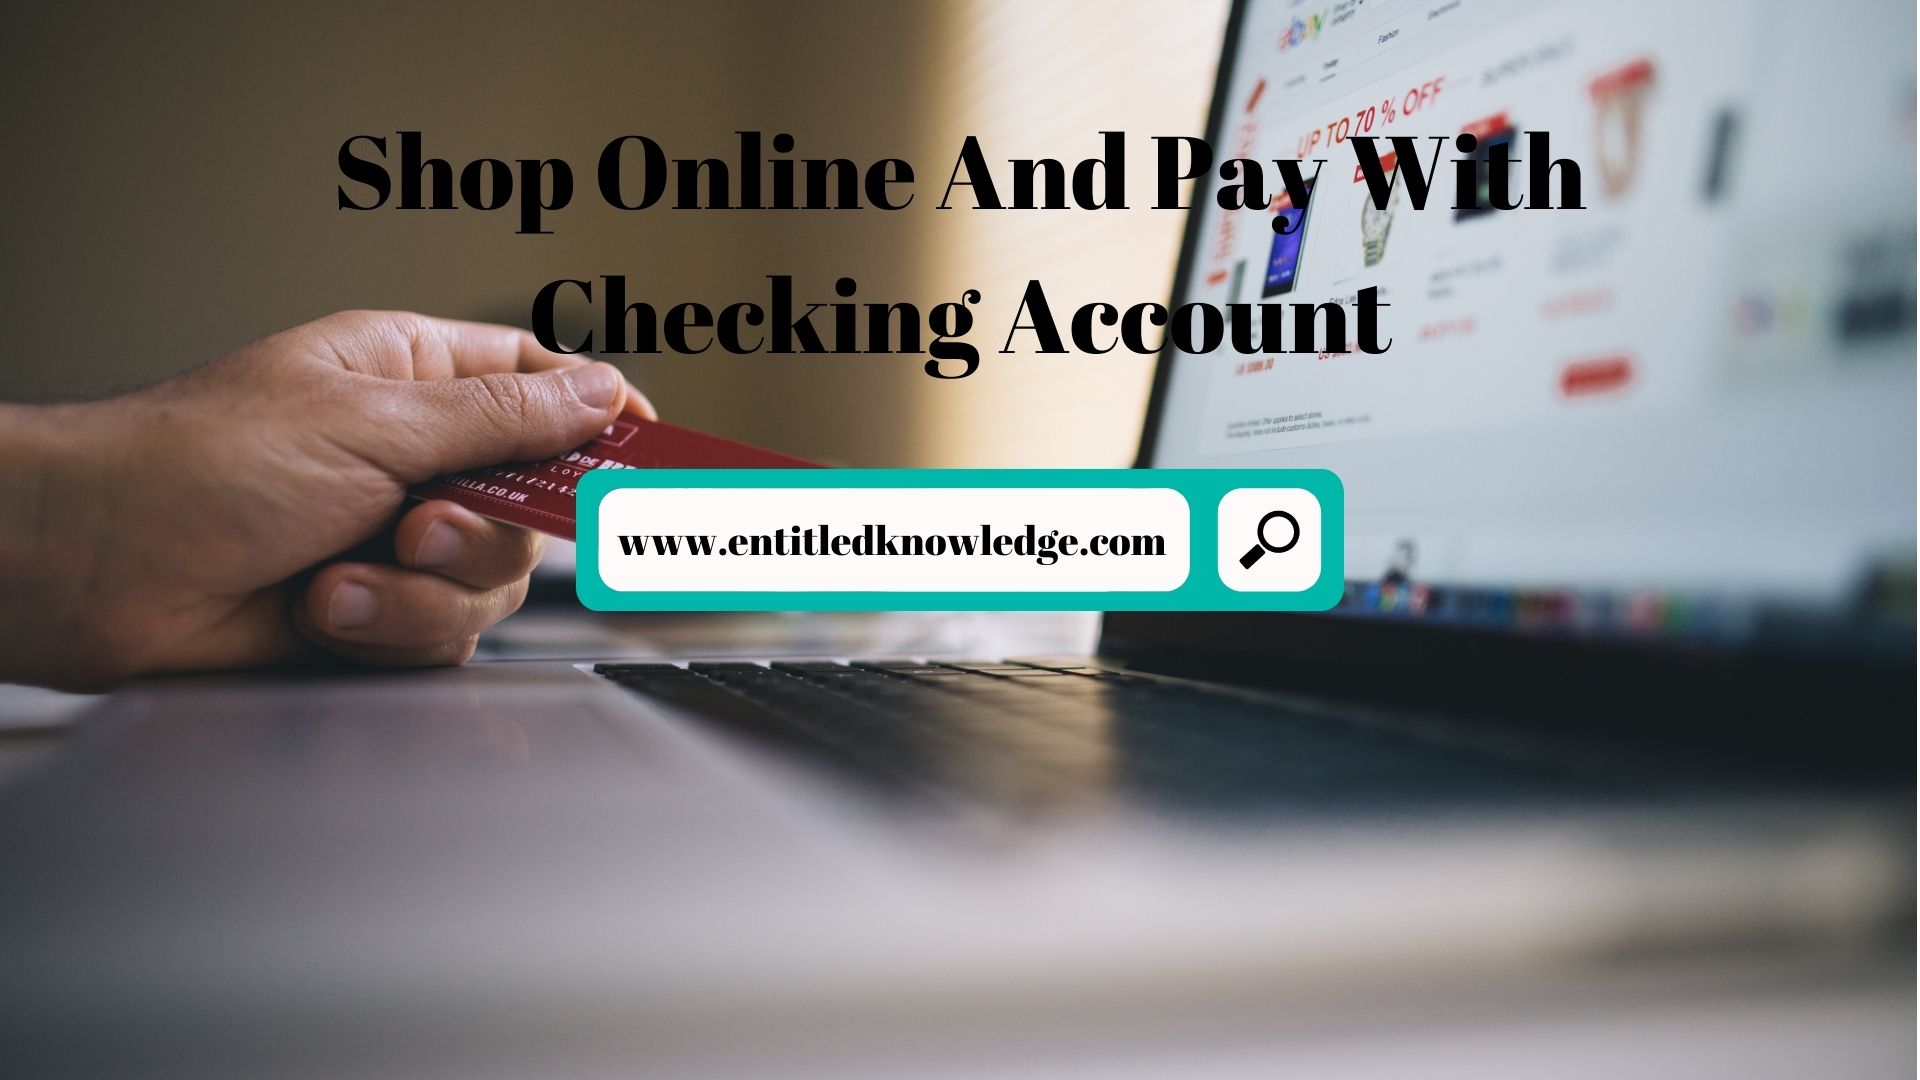 Shop Online And Pay With Checking Account